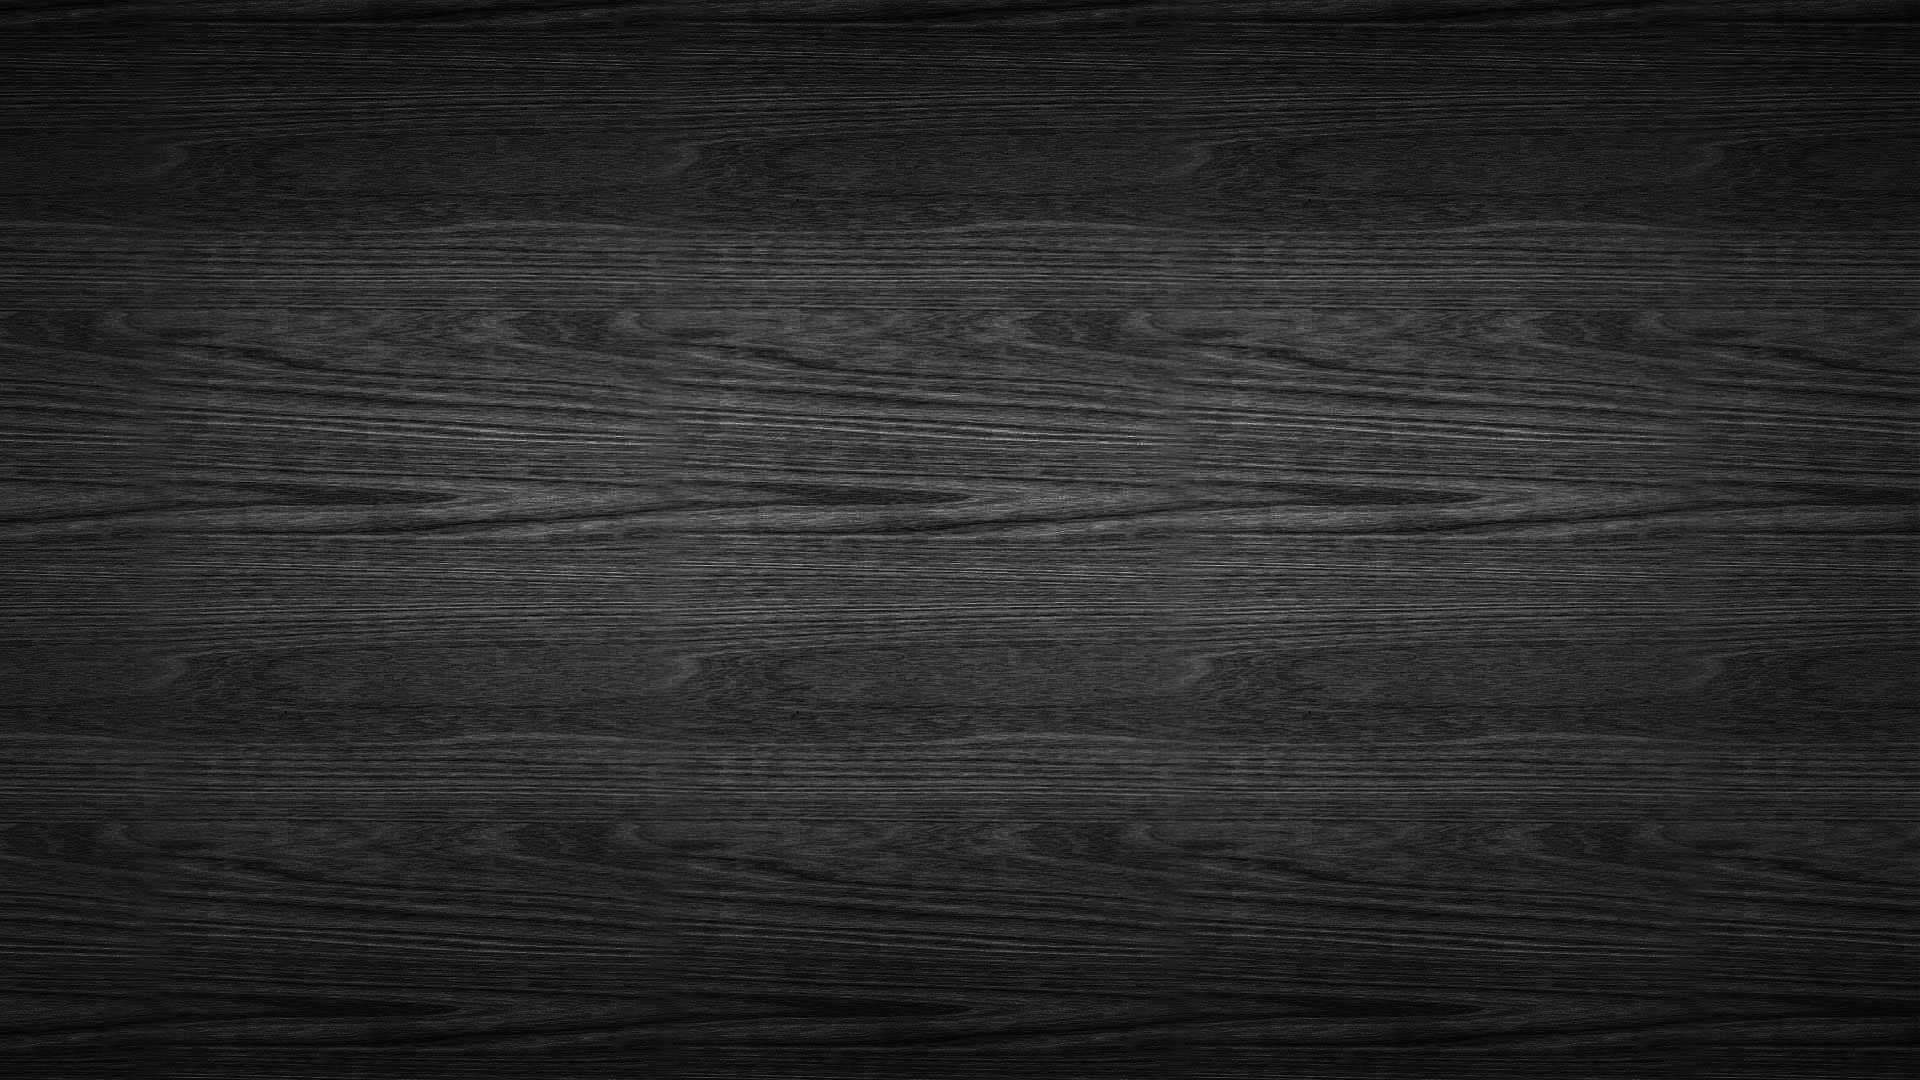 Black Wood Background Pictures In High Definition Or